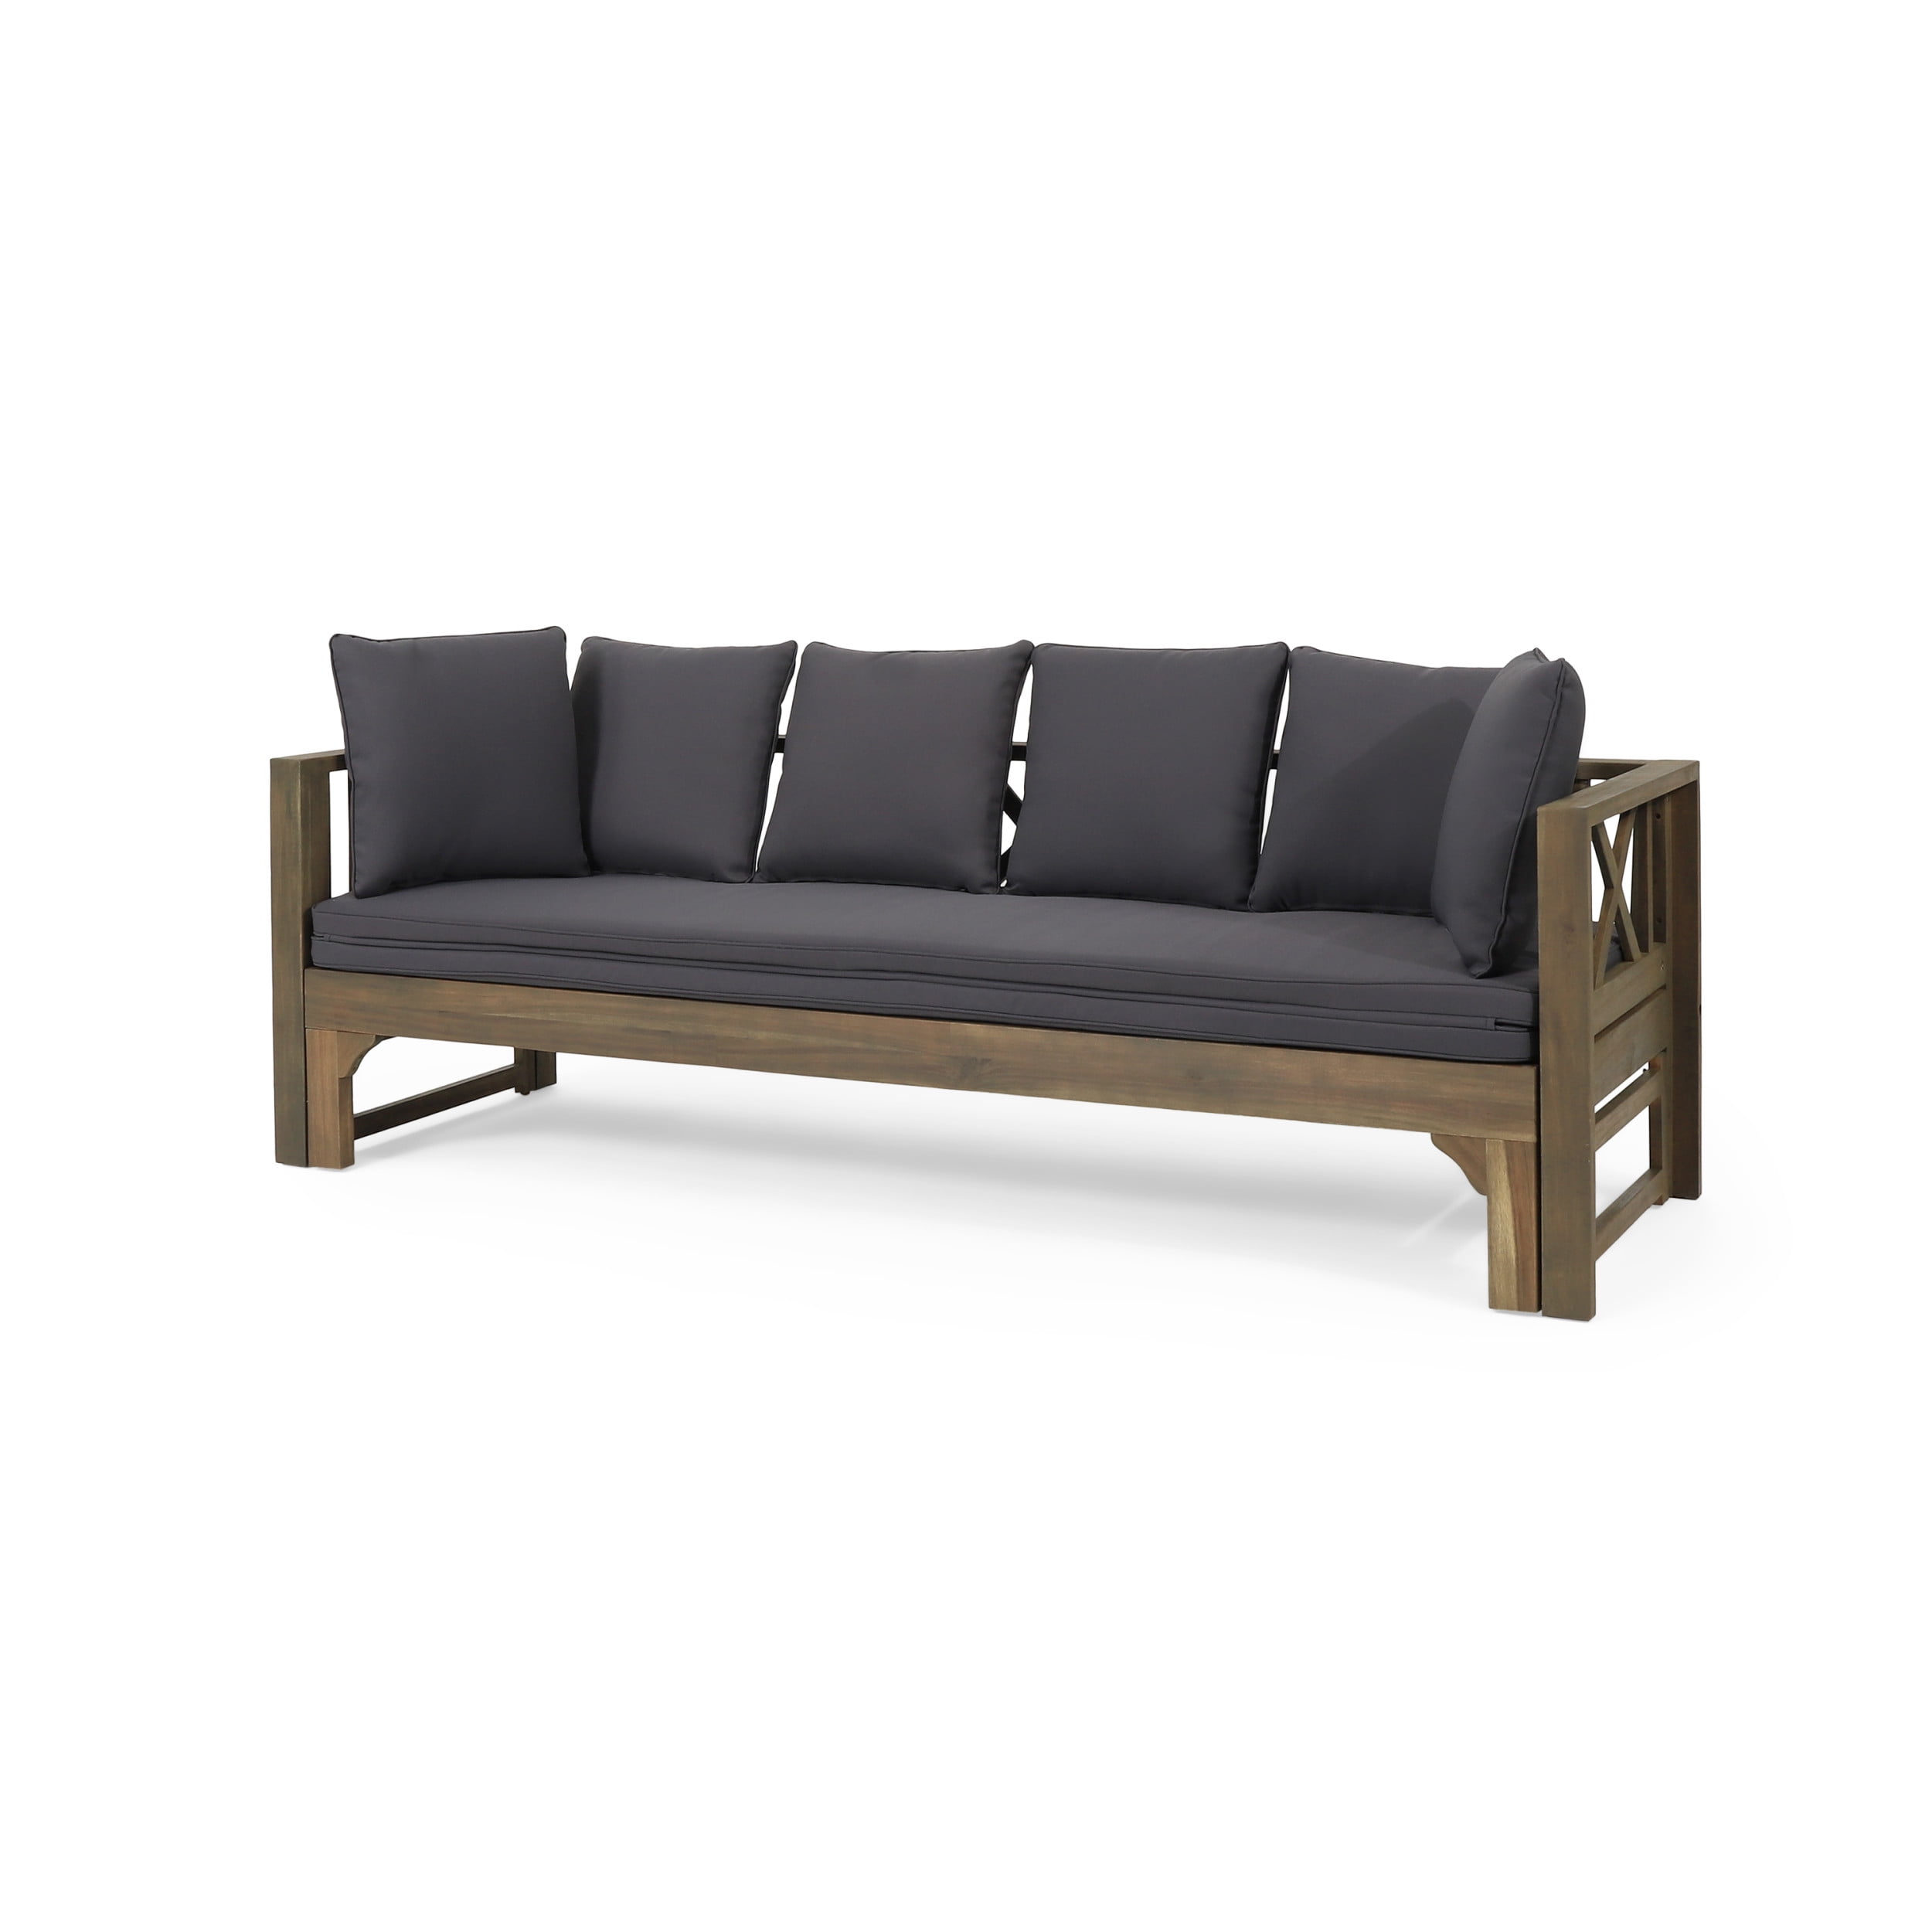 GDF Studio Camille Outdoor Extendable Daybed Dark Teal Acacia and Wood Teak Sofa